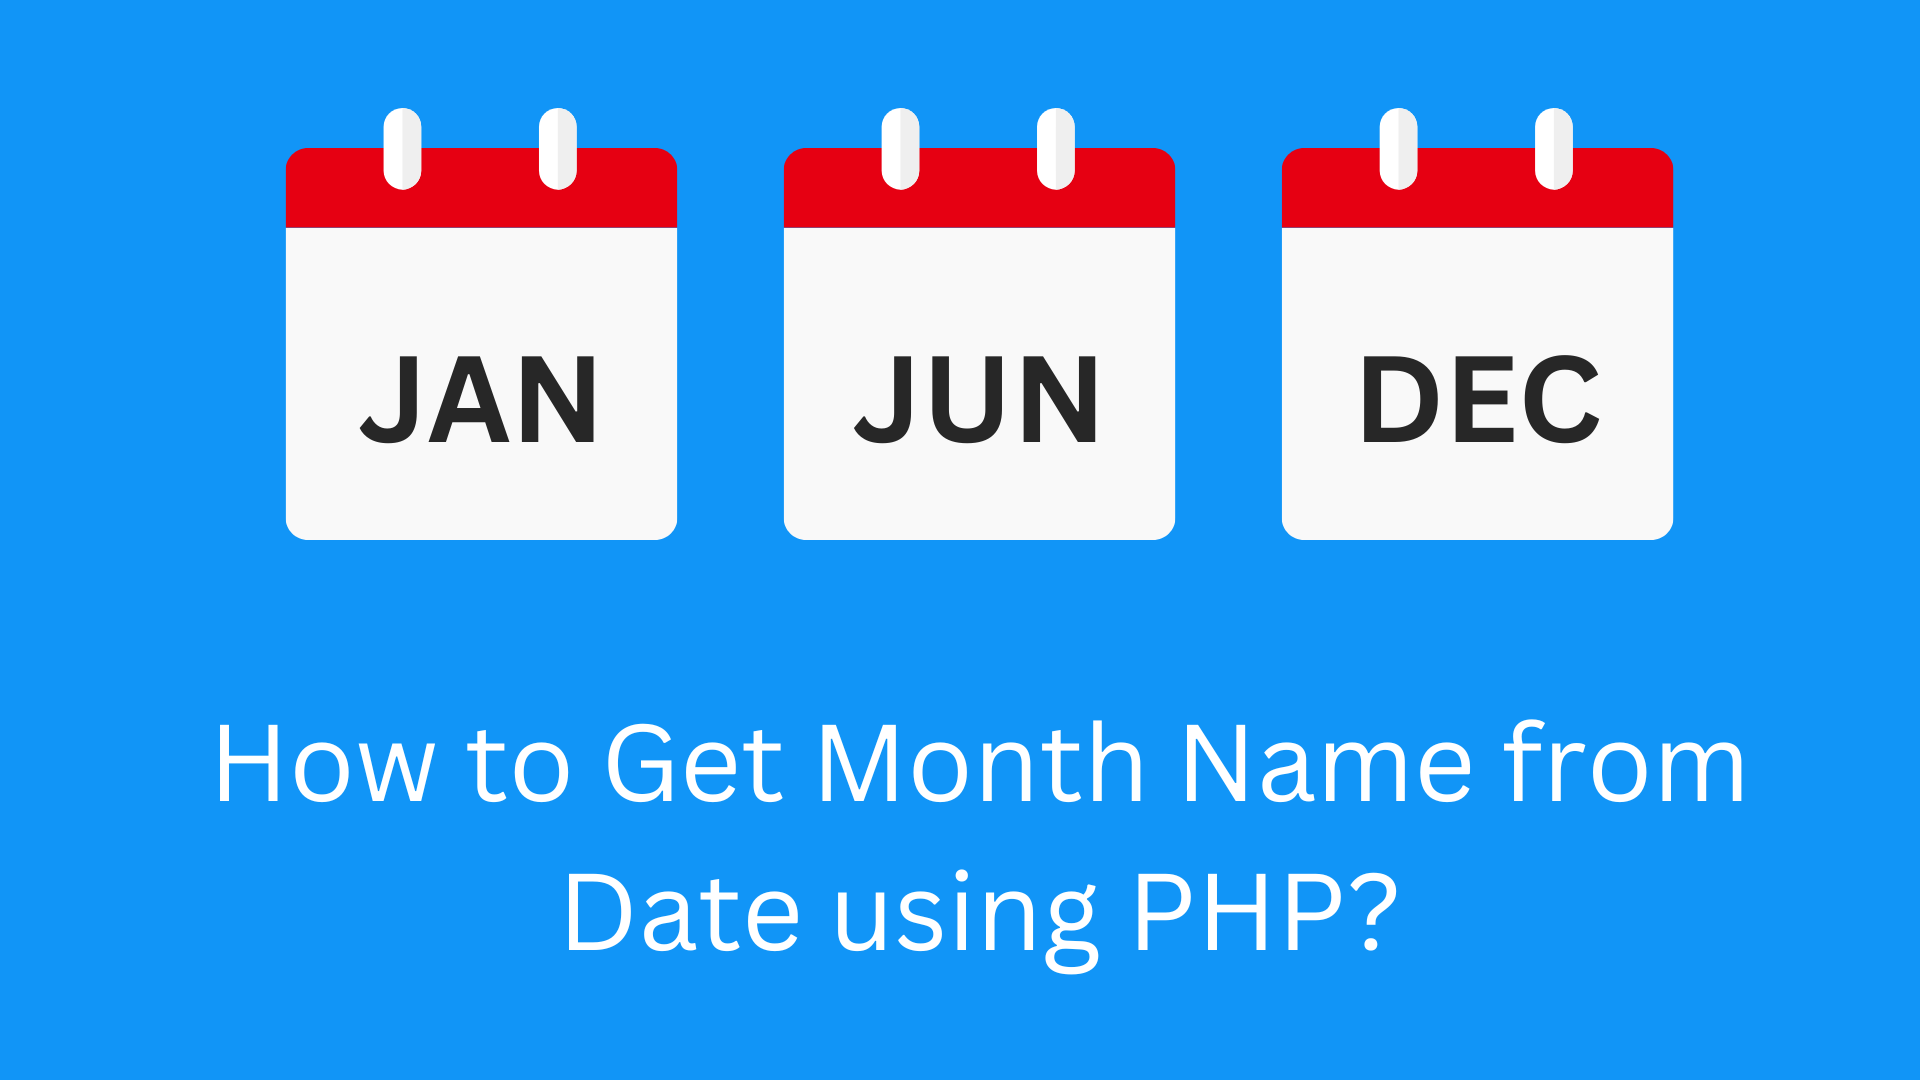 How to Get Month Name from Date using PHP?